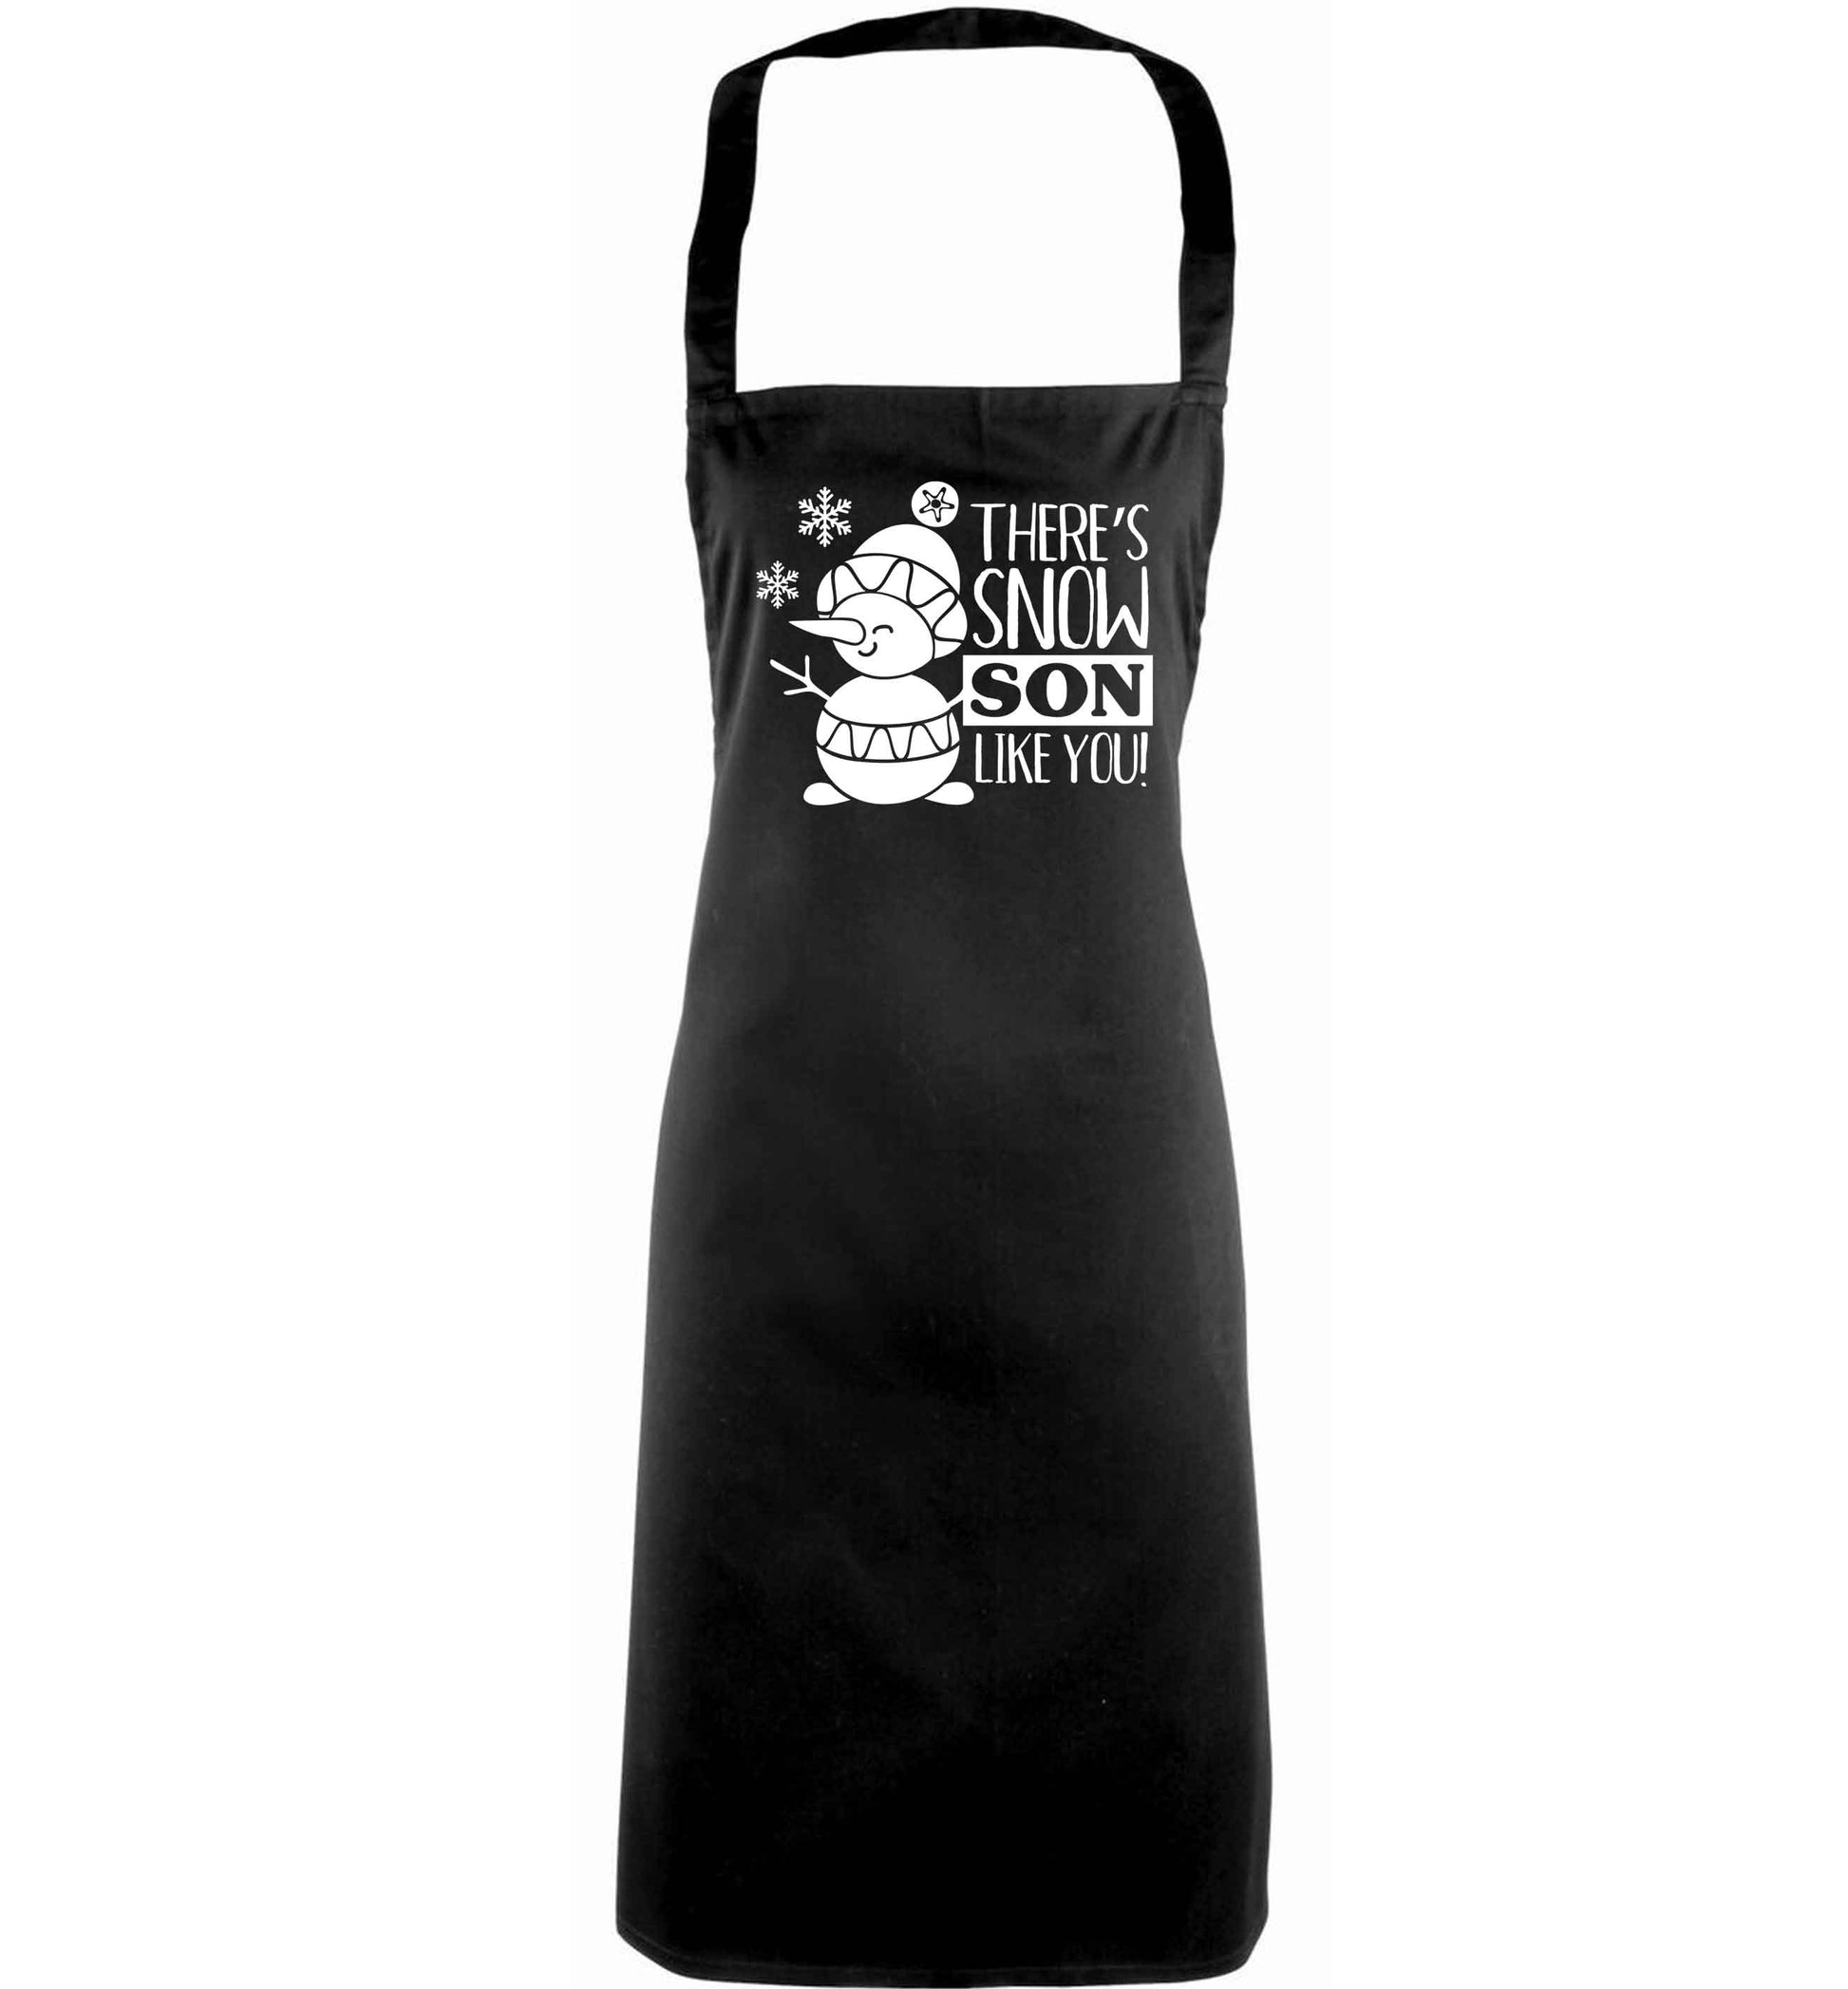 There's snow son like you adults black apron